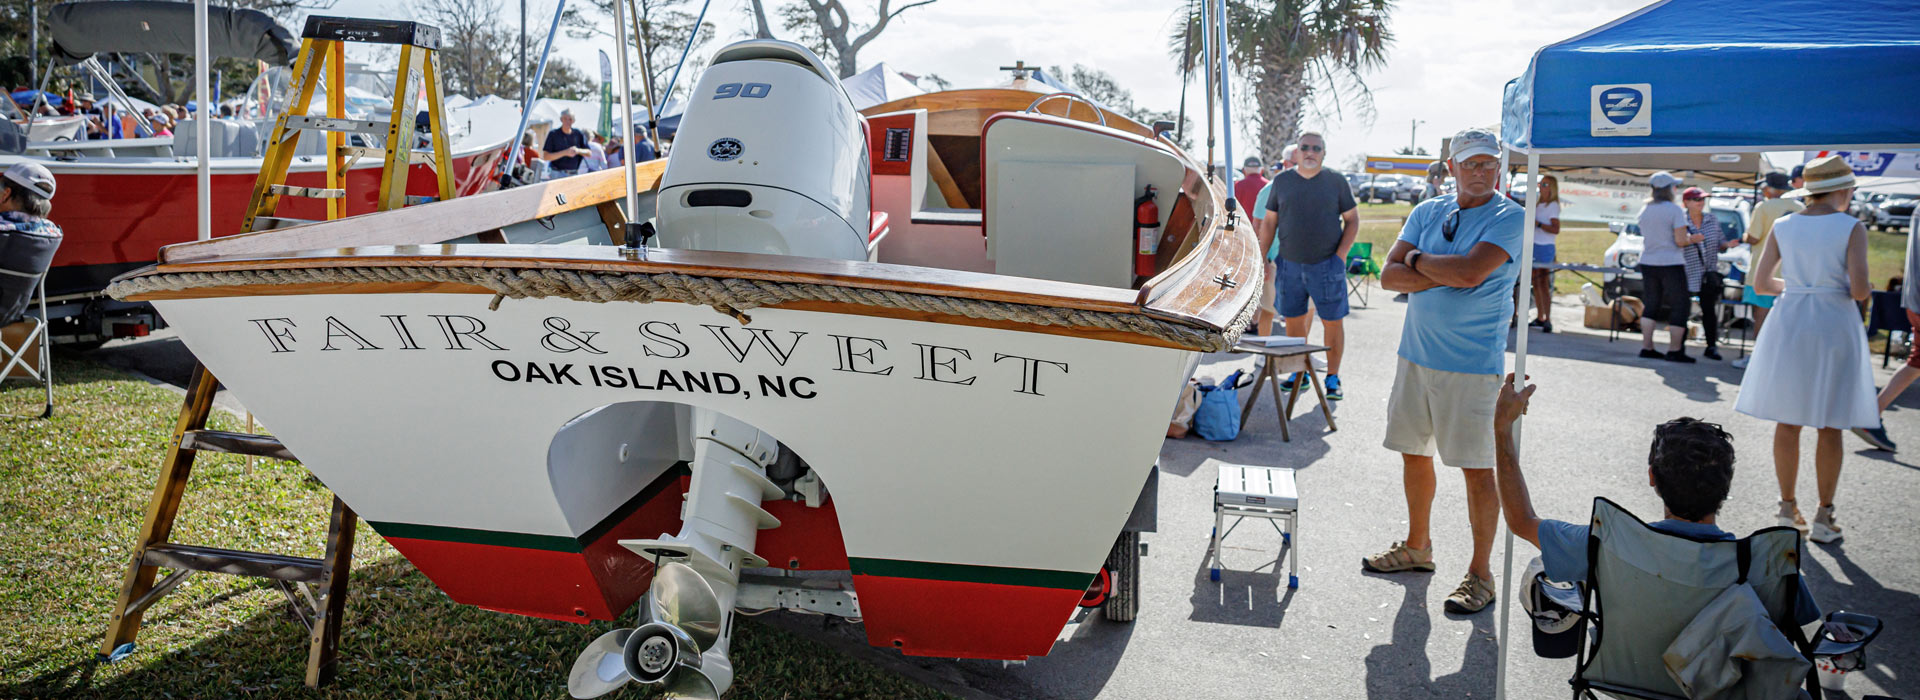 Southport Wooden Boat Show Southport, NC